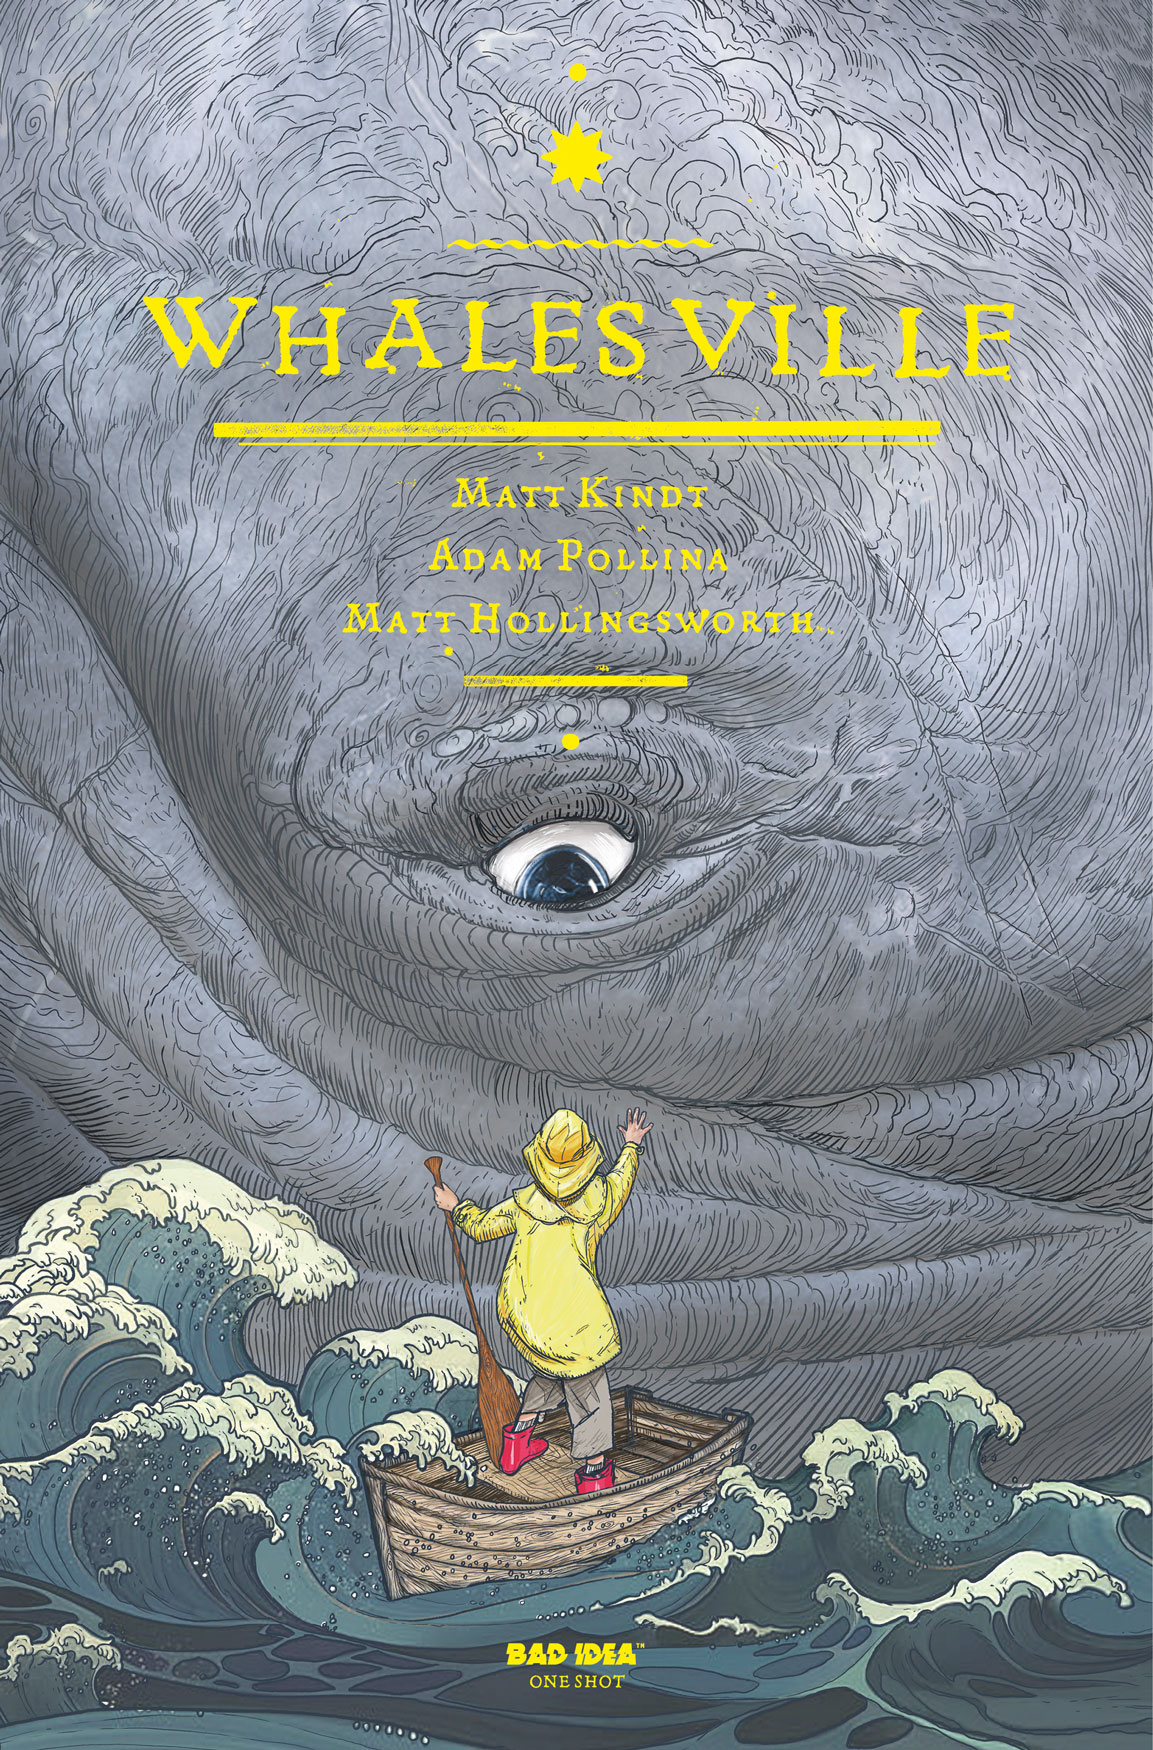 WHALES_001_COVER.jpg